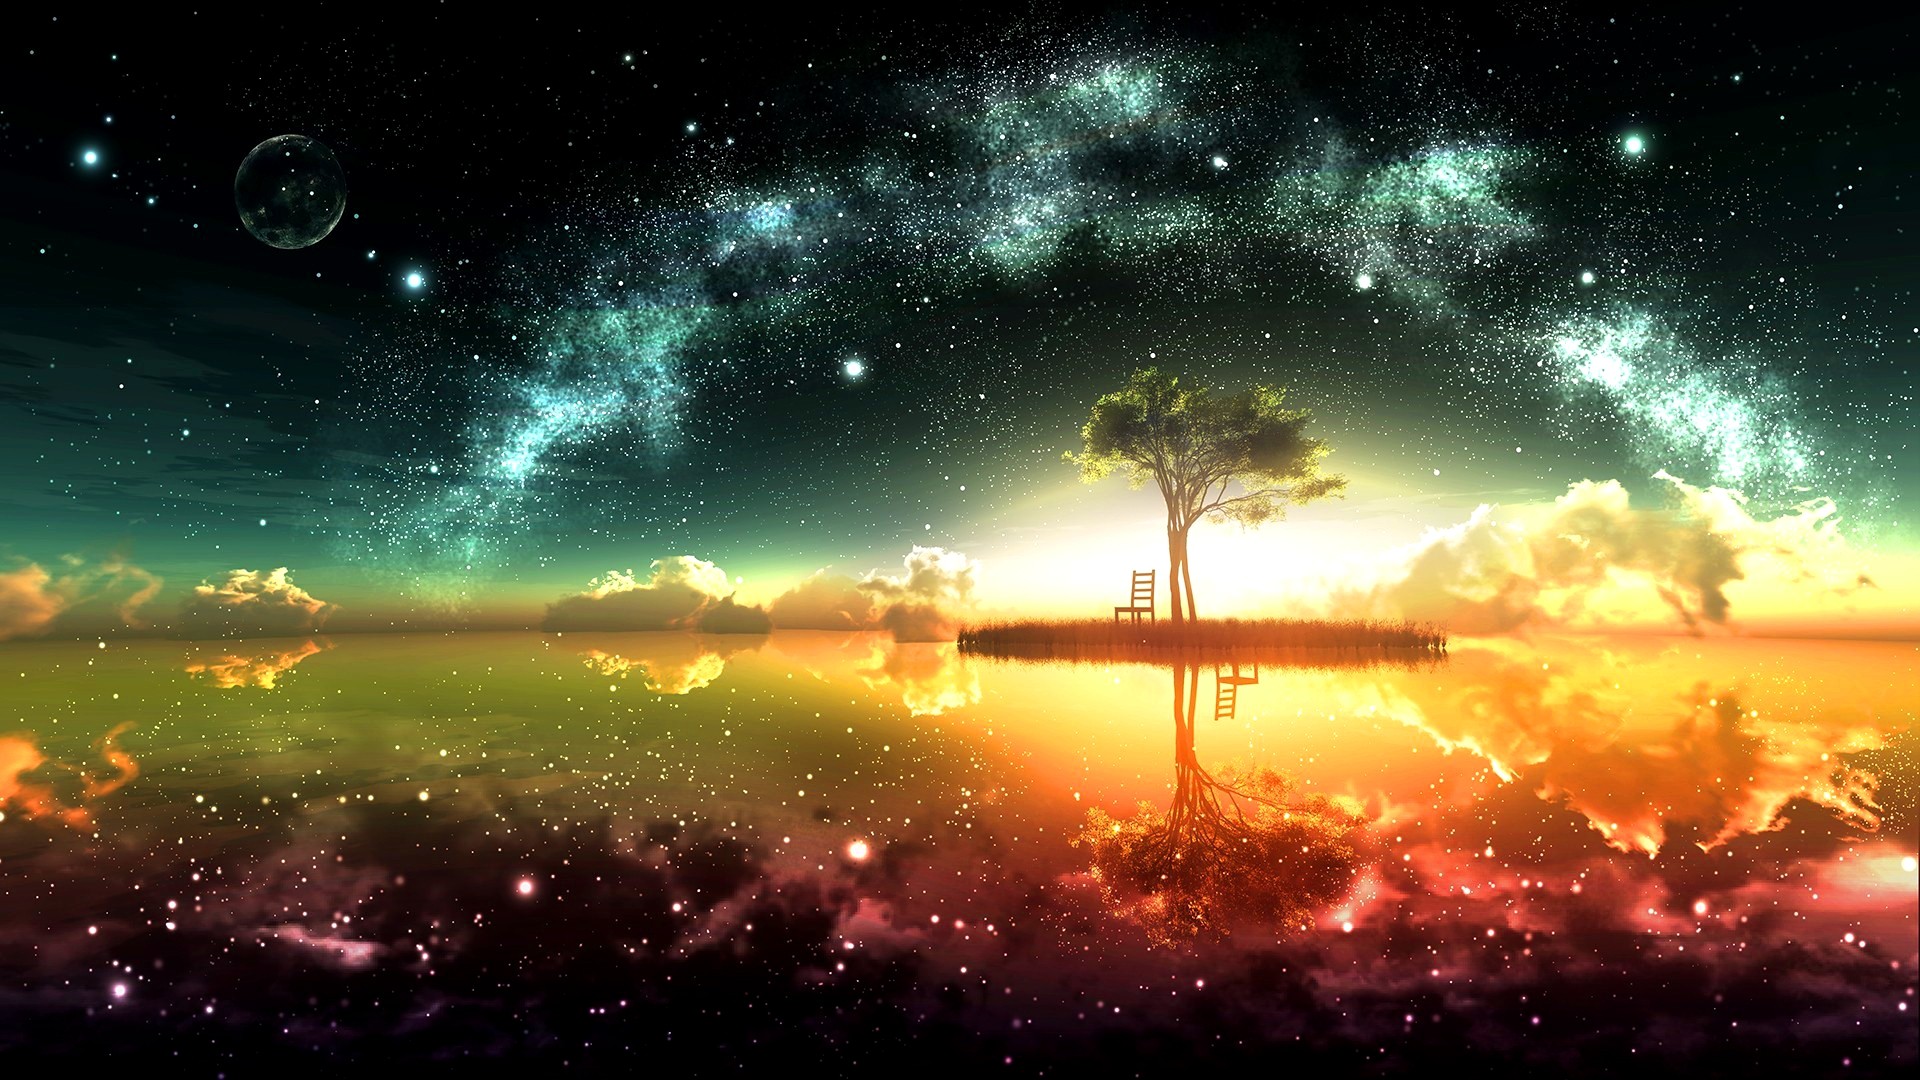 Surreal Space Wallpaper - High Definition, High Resolution HD Wallpapers :  High Definition, High Resolution HD Wallpapers